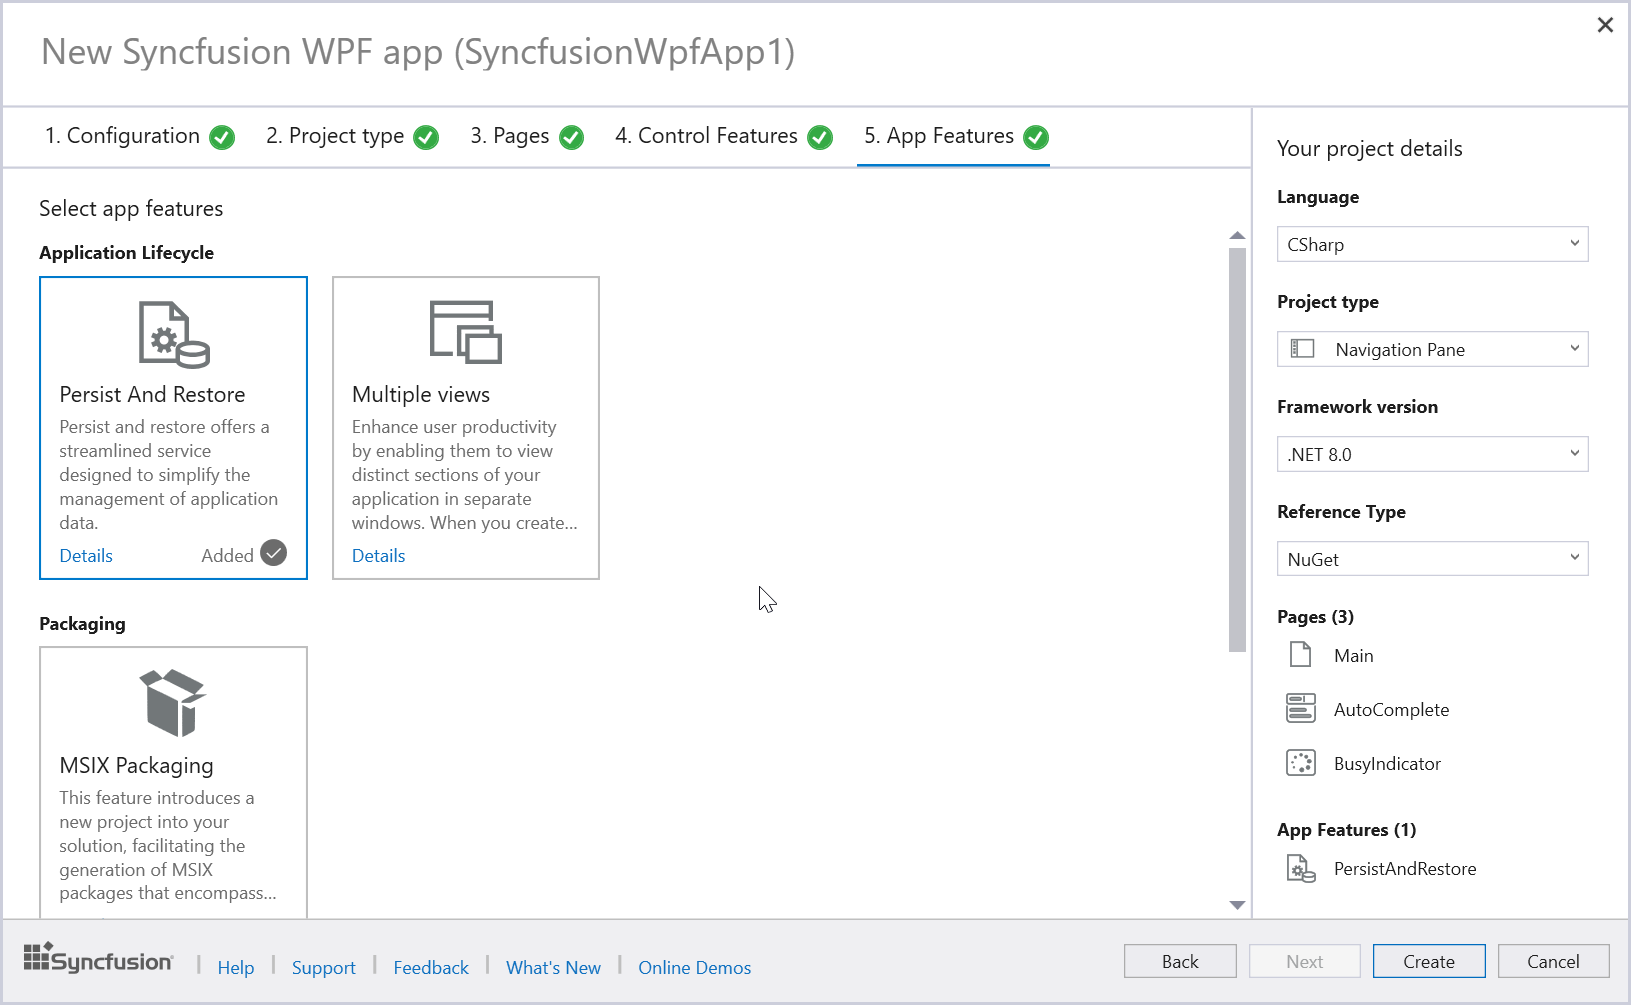 Syncfusion WPF app features selection wizard